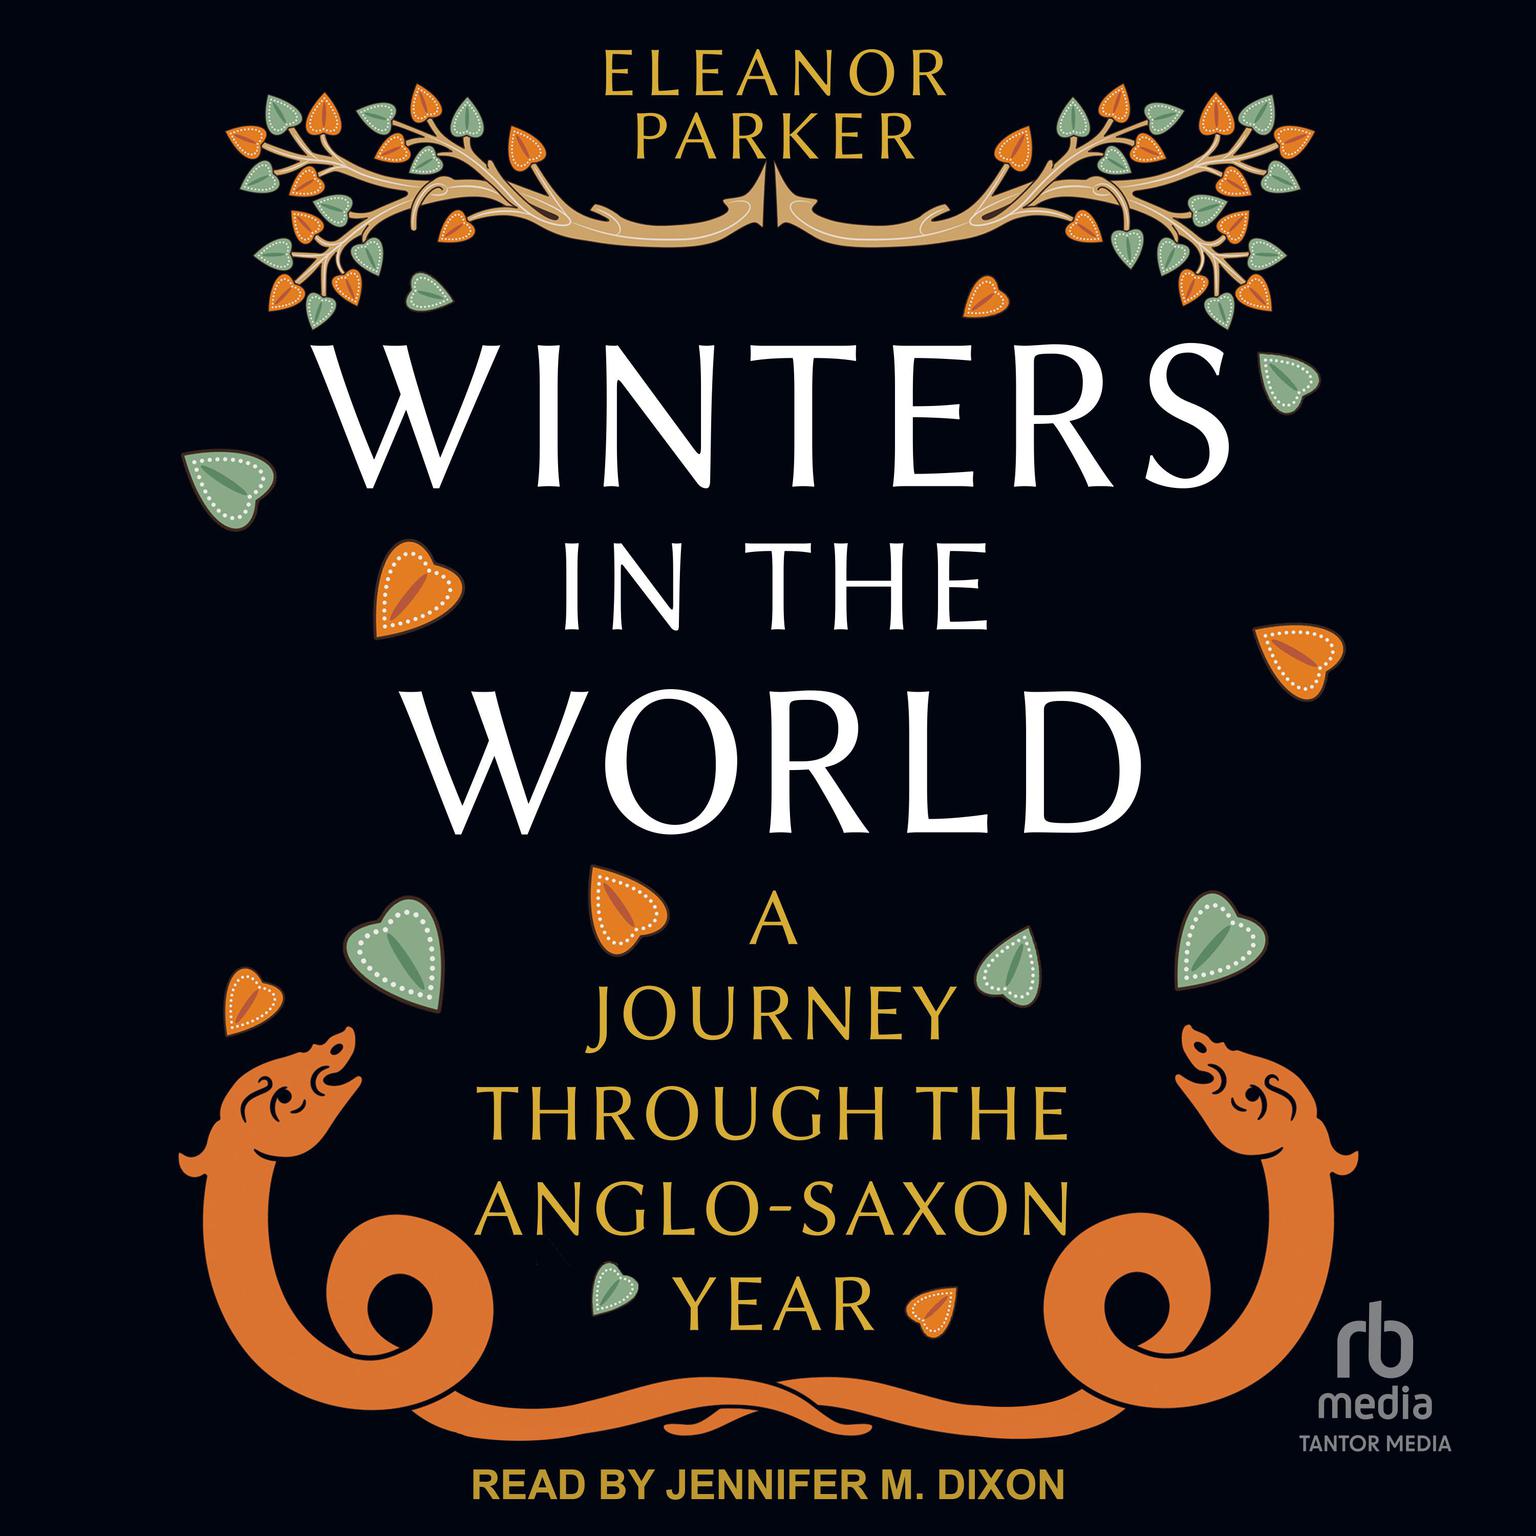 Winters in the World: A Journey through the Anglo-Saxon Year Audiobook, by Eleanor Parker